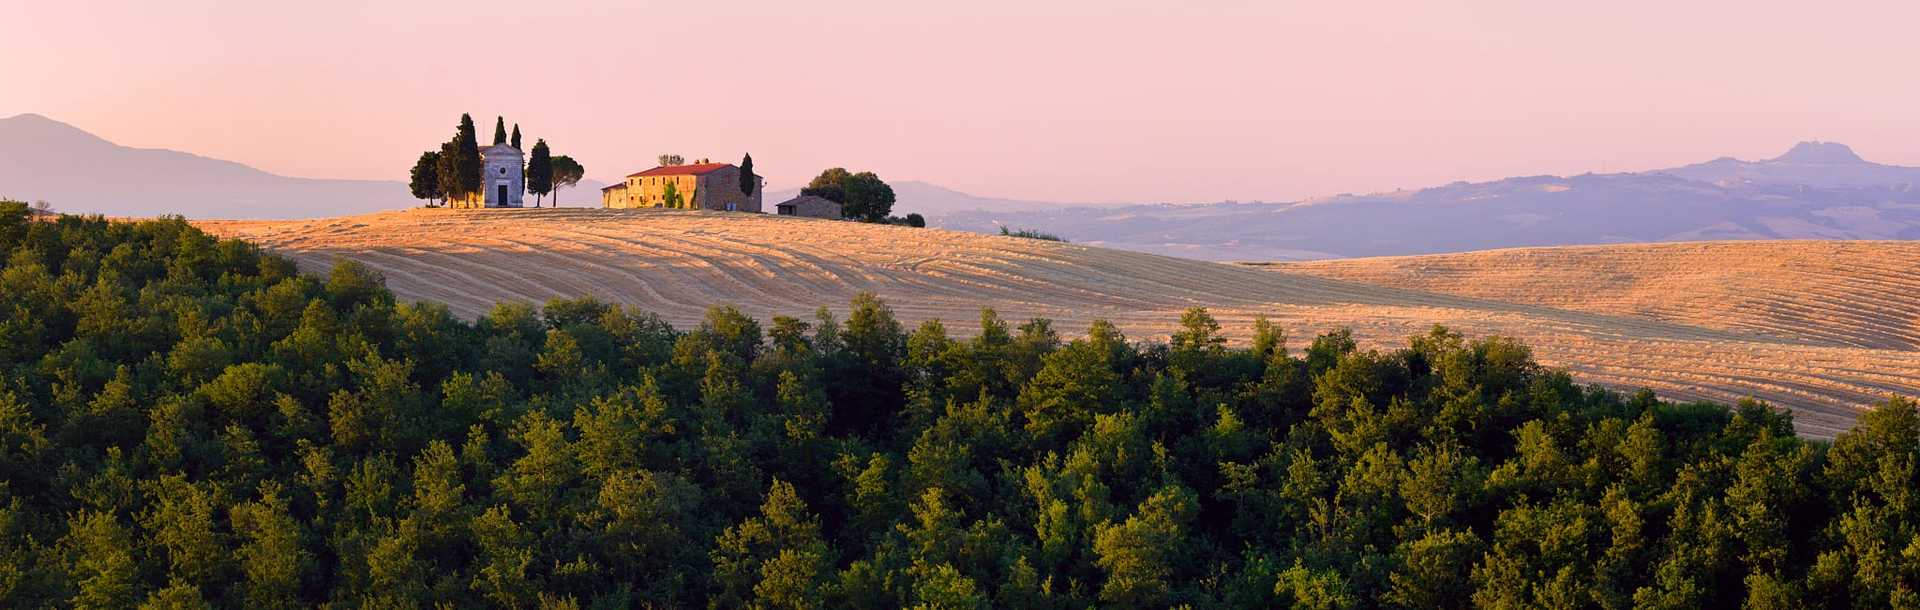 Cappella di Vitaleta on the hills of Val d'Orcia in Tuscany, Italy.